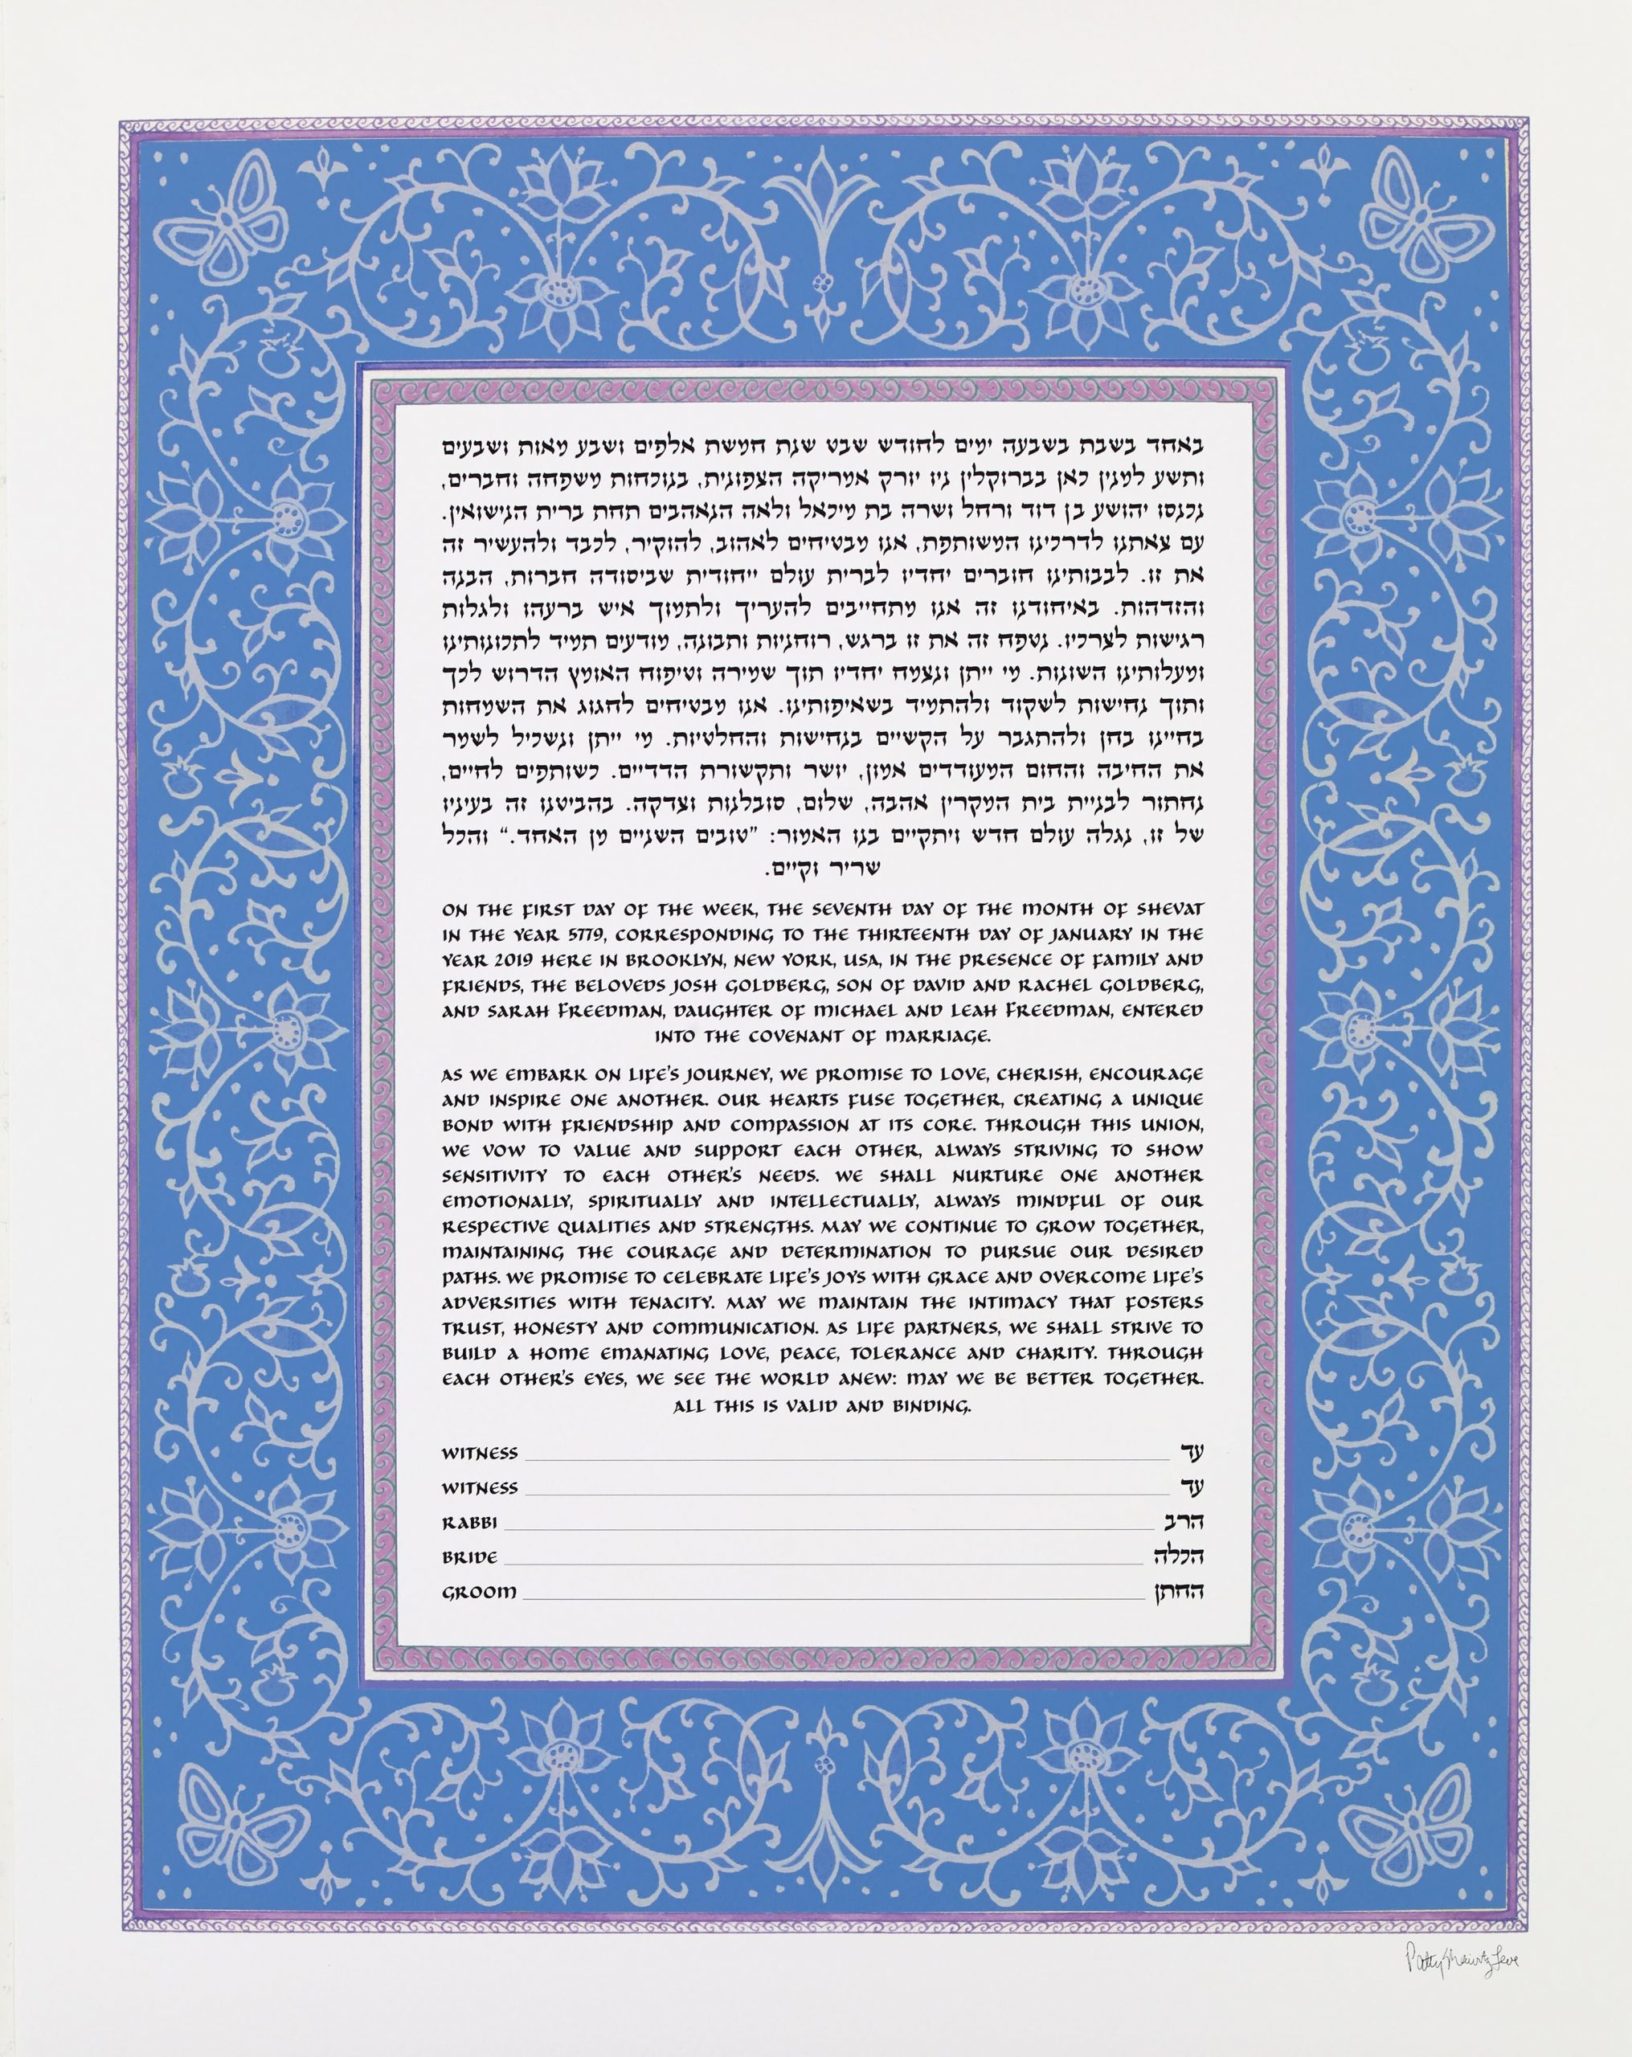 Butterfly Garden - Blue Ketubah Marriage Contracts by Patty Shaivitz Leve